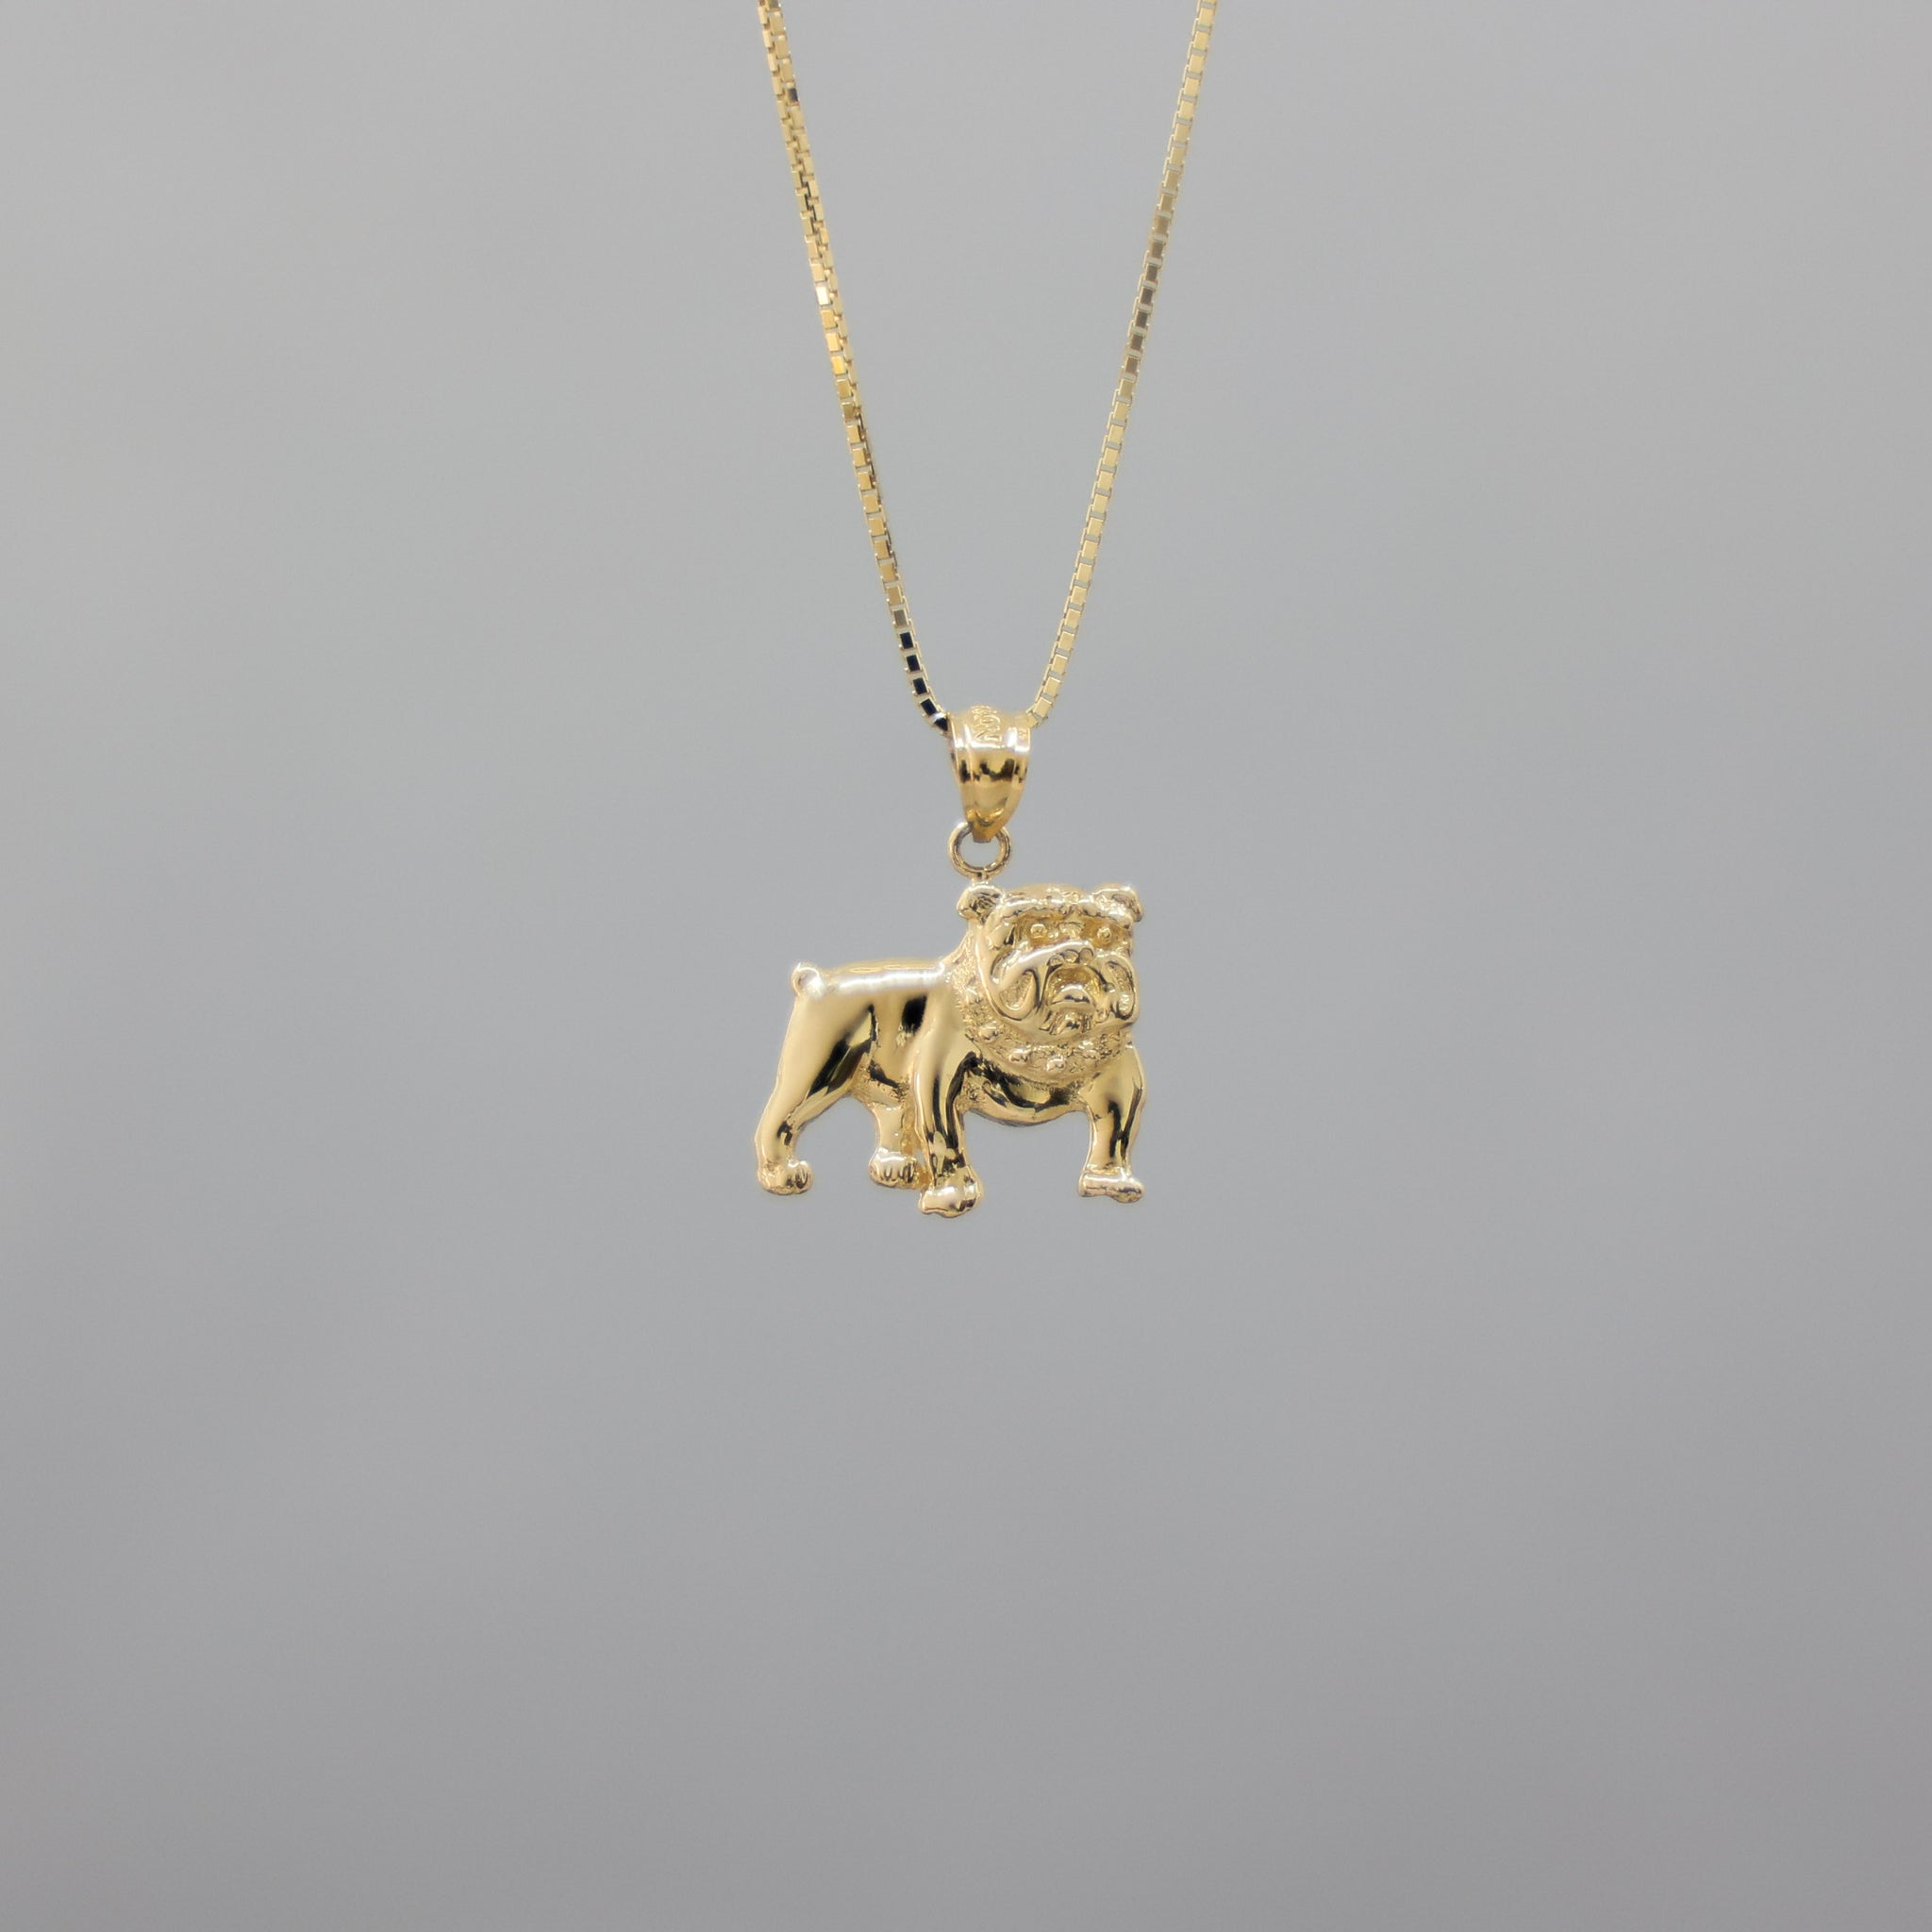 Curious French Bulldog Love Silver Pendant and Necklace